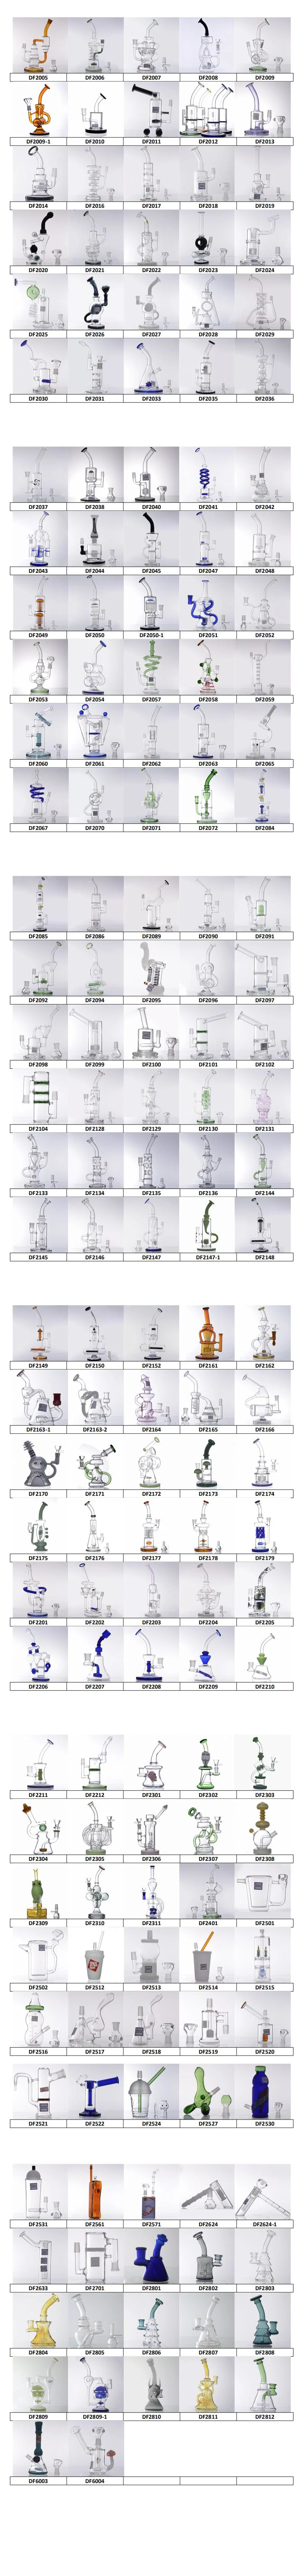 DF8402 Fashion Portable Glass Recycles Hookah Glass Smoking Water Pipe